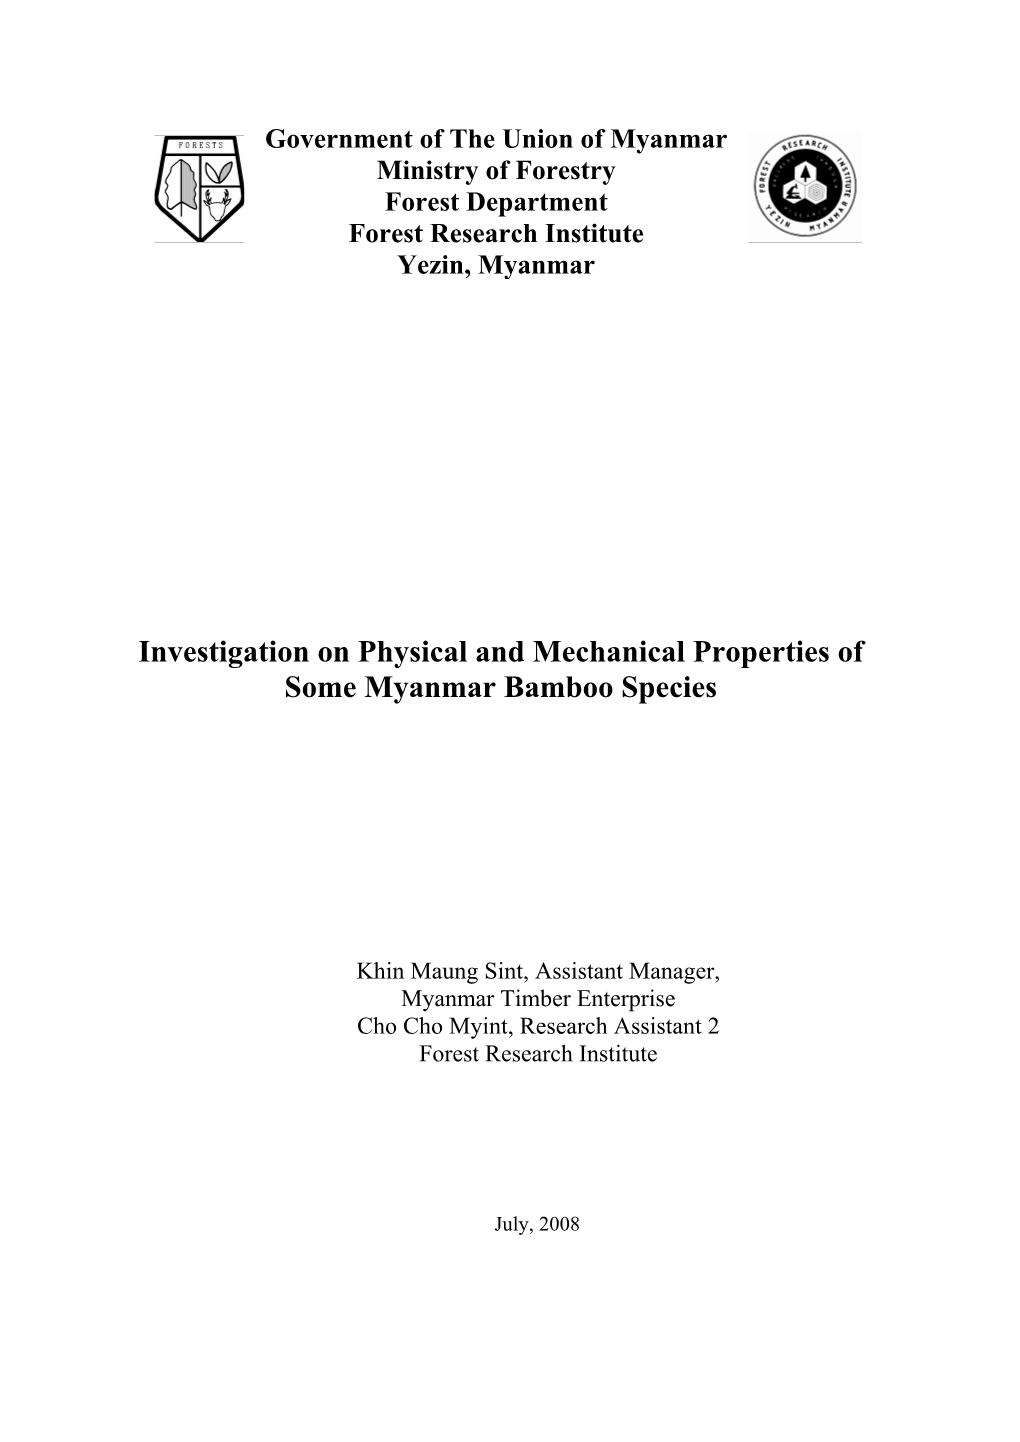 Investigation on Physical and Mechanical Properties of Some Myanmar Bamboo Species